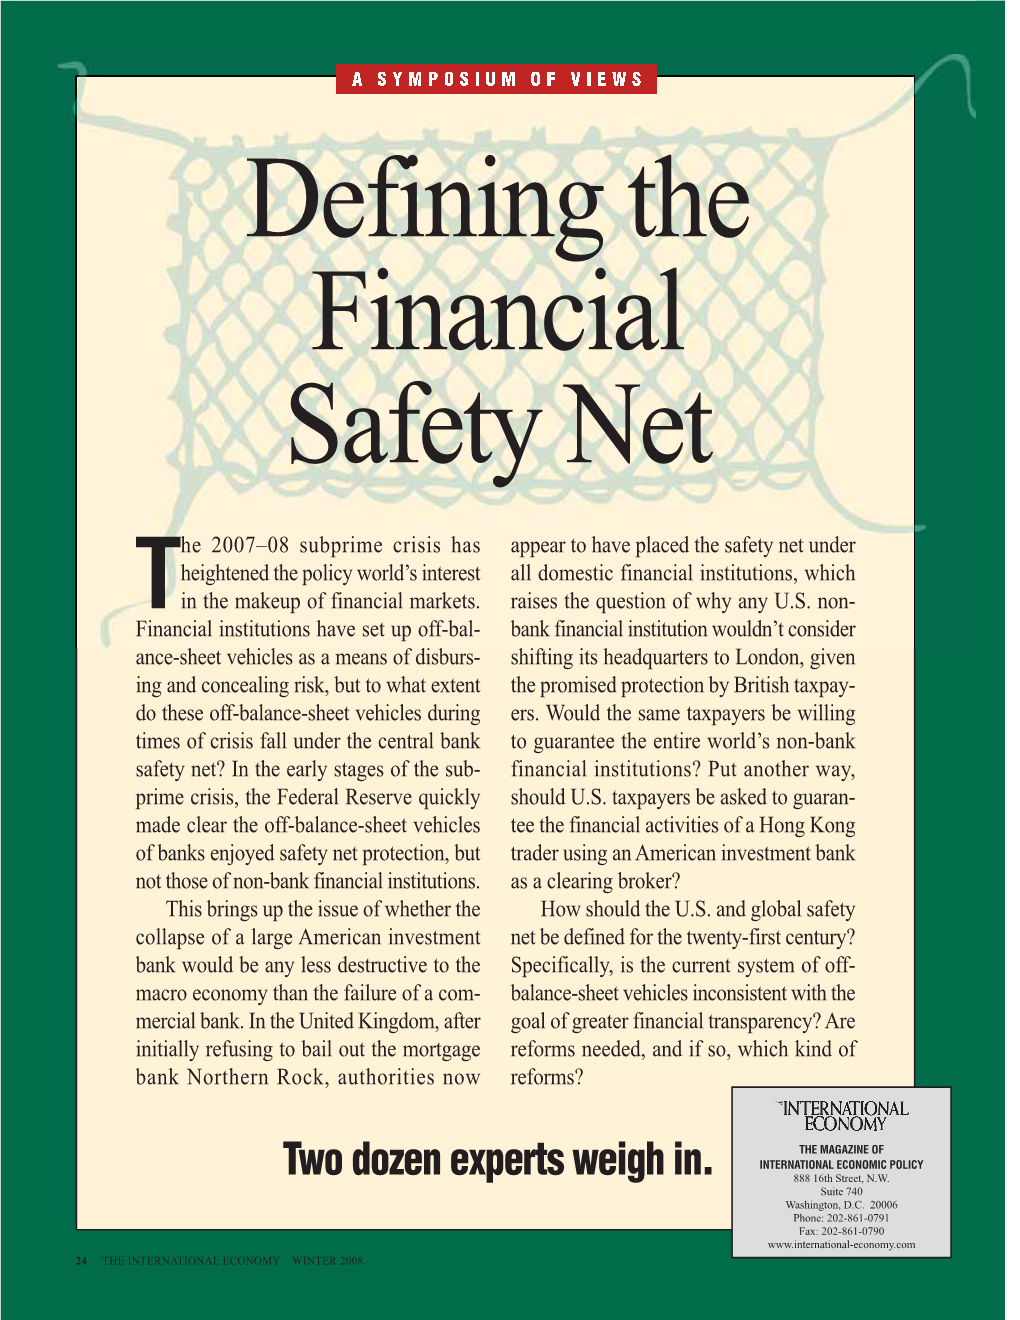 Defining the Financial Safety Net